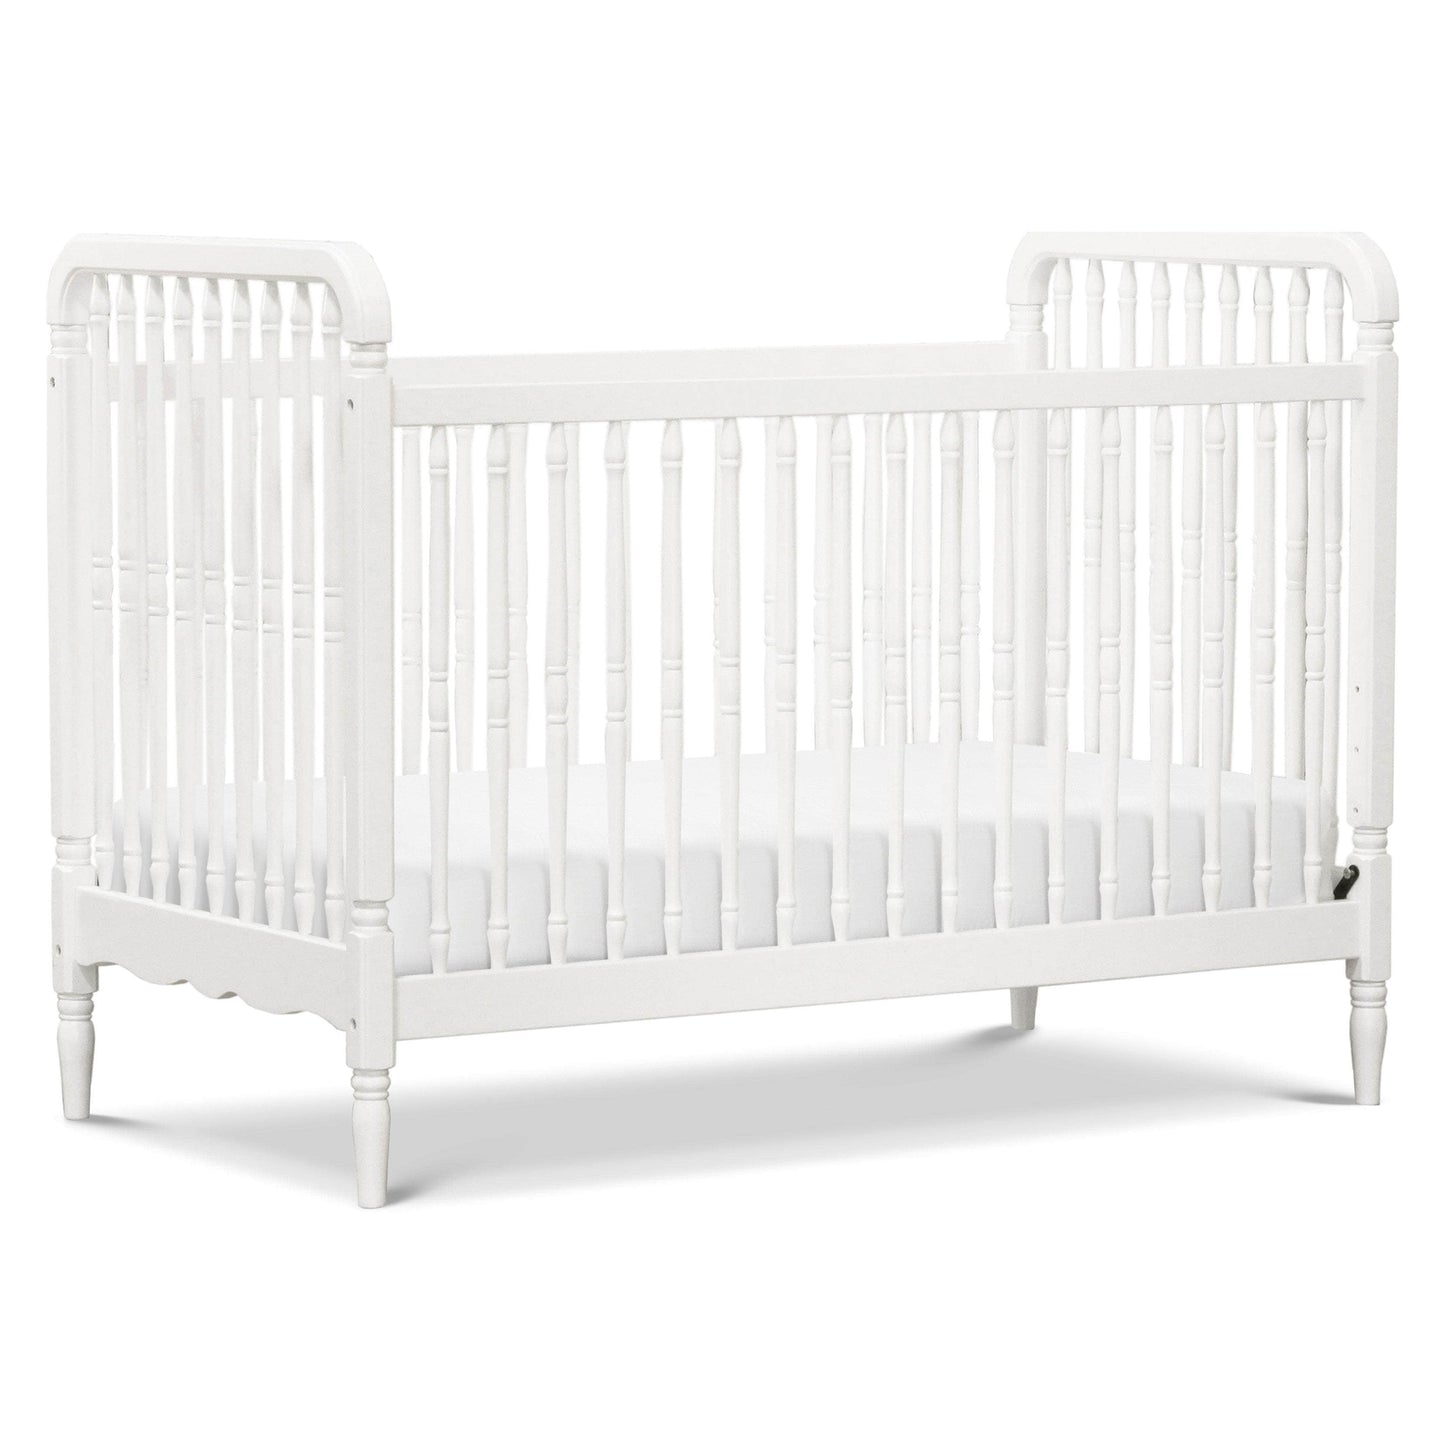 M7101RW,Liberty 3-in-1 Convertible Spindle Crib w/Toddler Bed Conversion Kit in Warm White